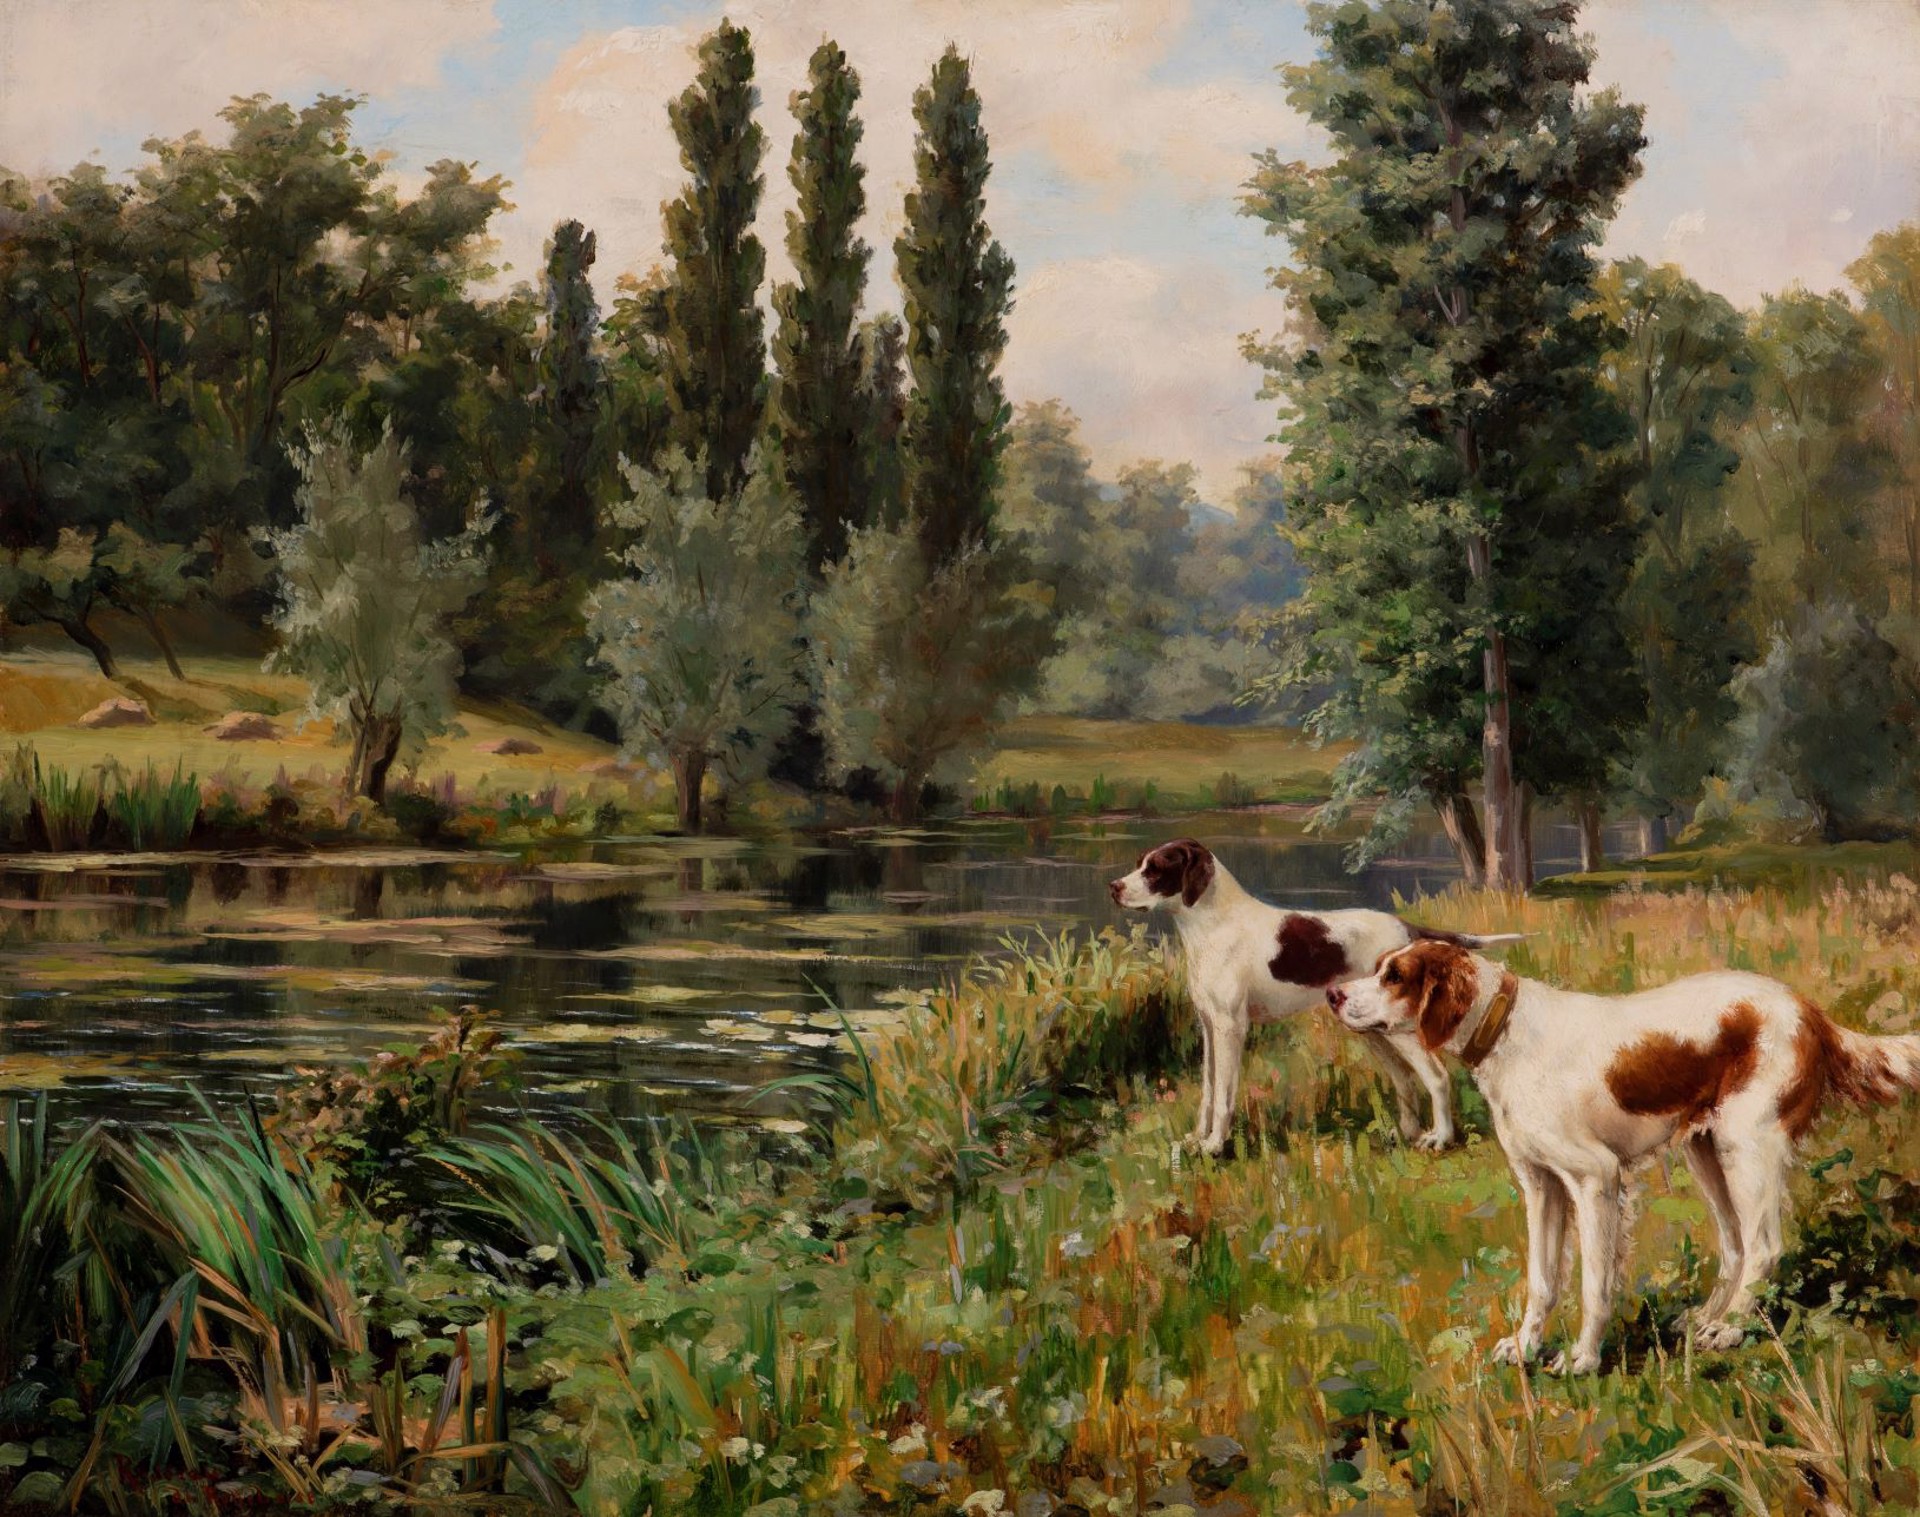 A Setter and a Pointer in a Landscape by Percival Leonard Rosseau